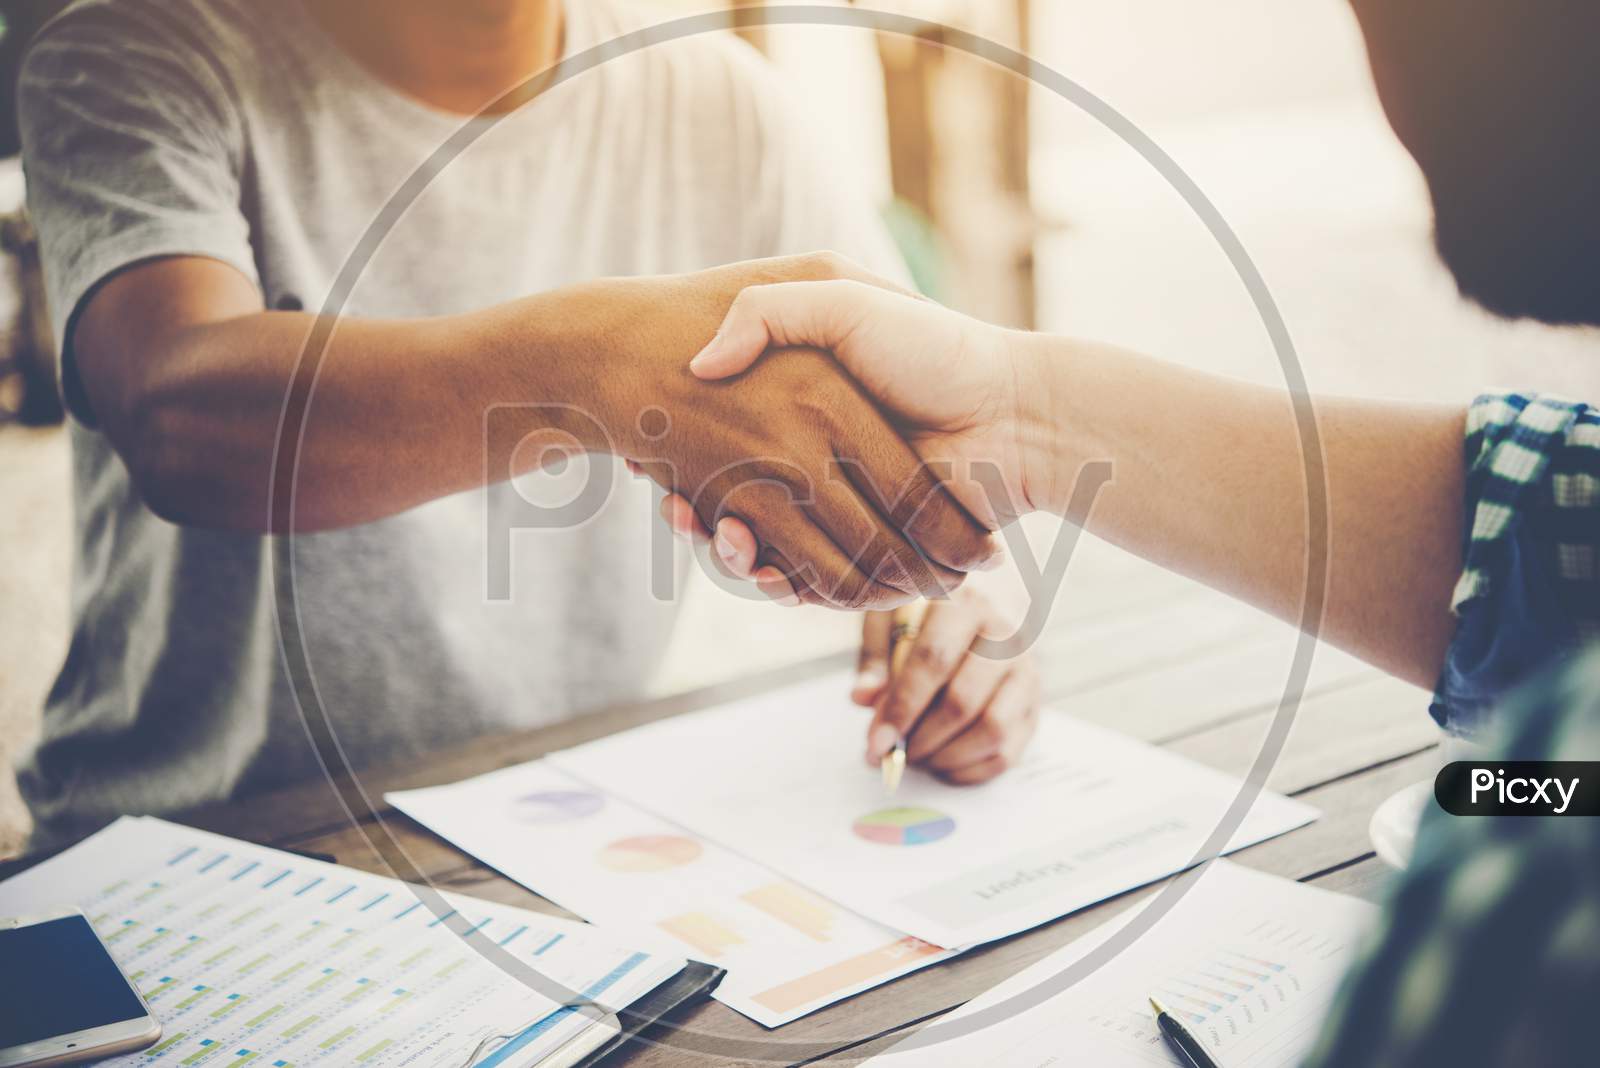 Close-Up Of Two Business People Shaking Hands While Sitting At The Working Place.